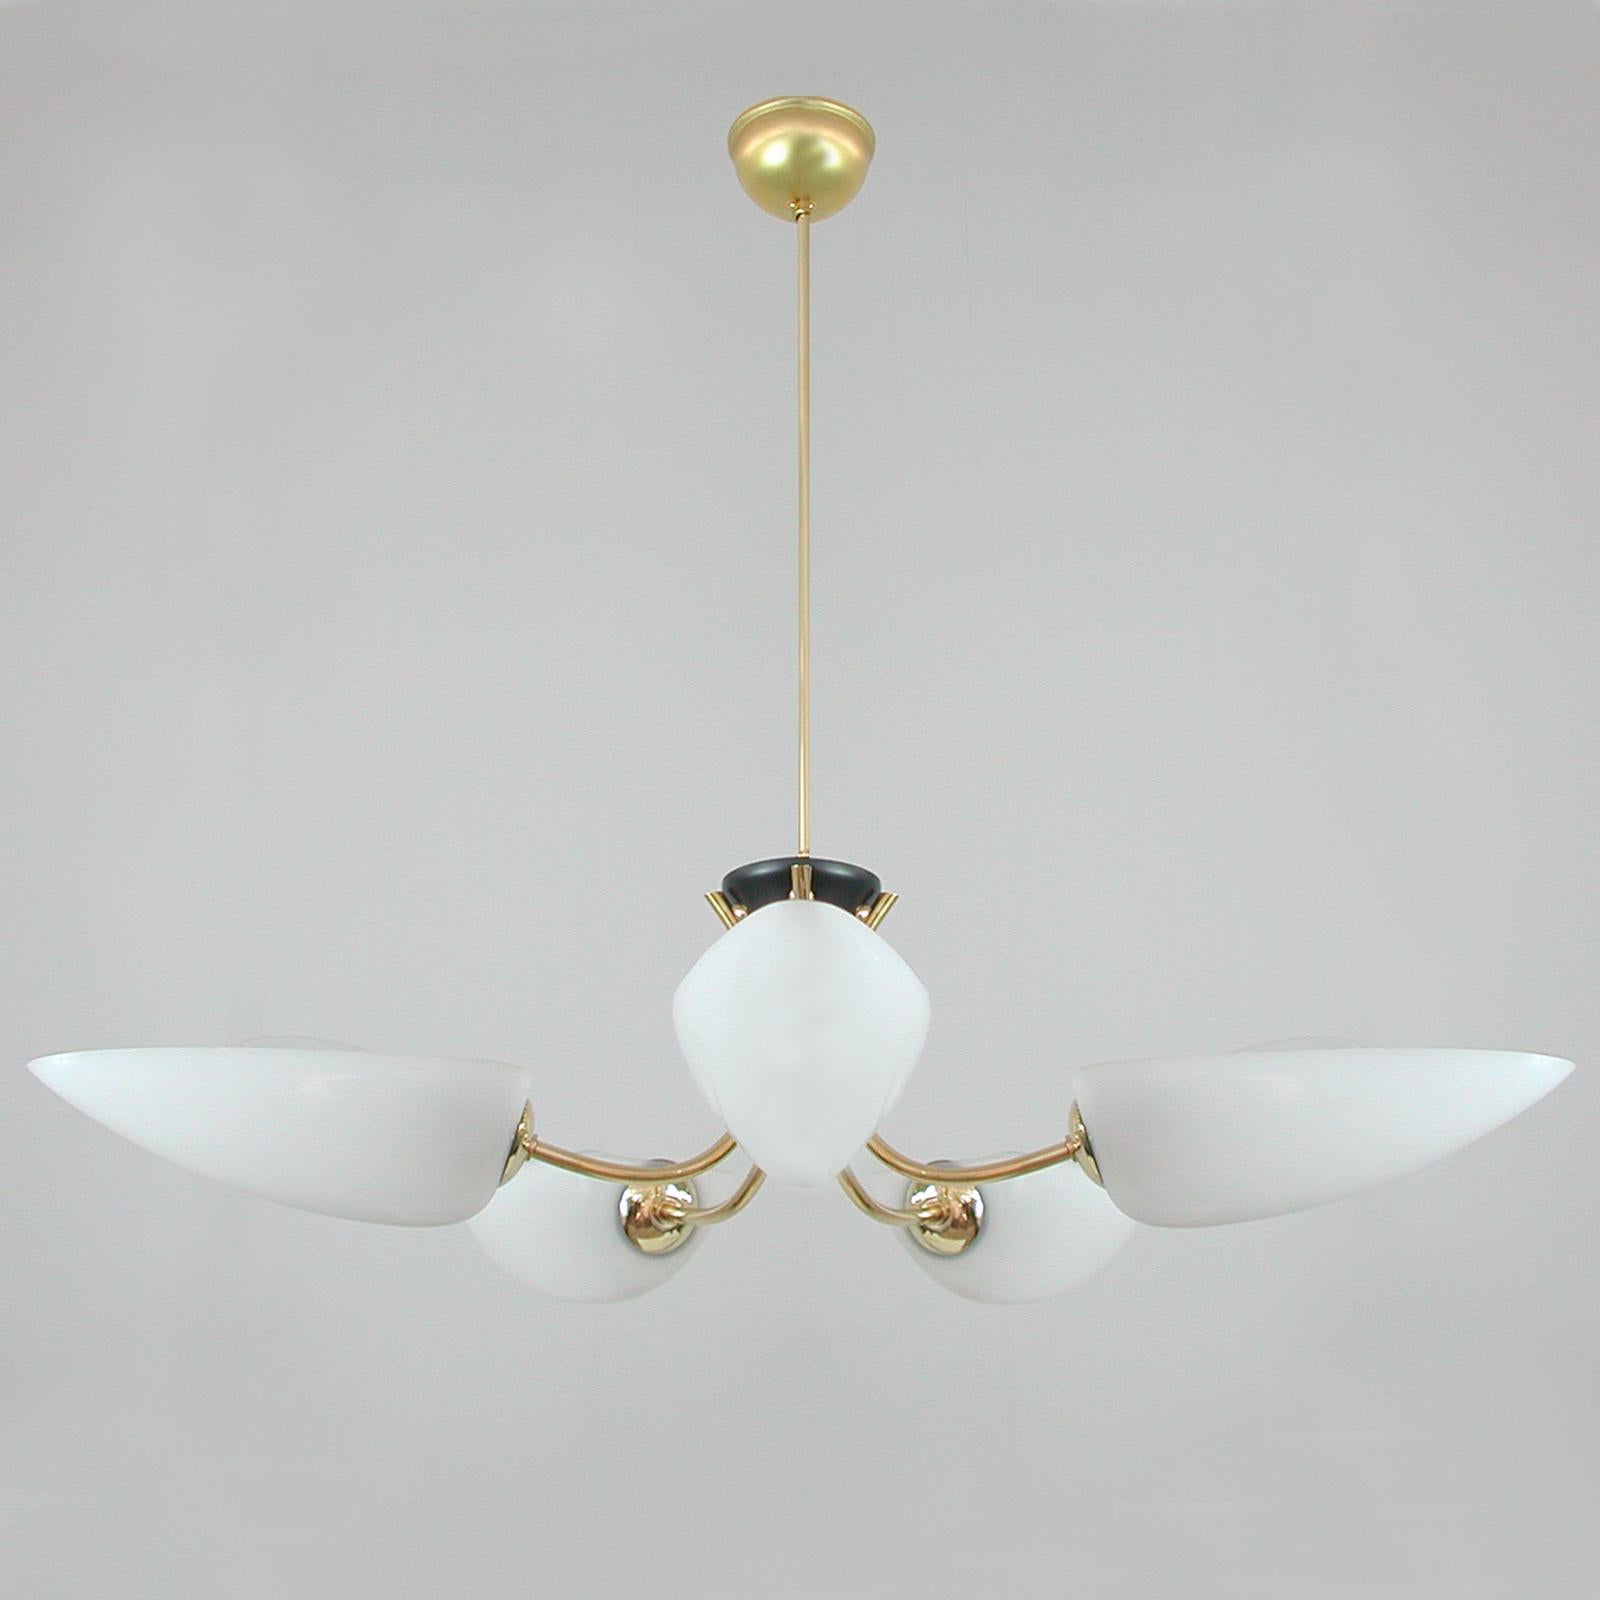 This handsome Maison Arlus Style spider fixture was designed and manufactured in France in the 1950s. It features five candelabra lights extended by brass arms. The white leaf shaped lampshades are made of acrylic. 

The light requires 5 E14 bulbs